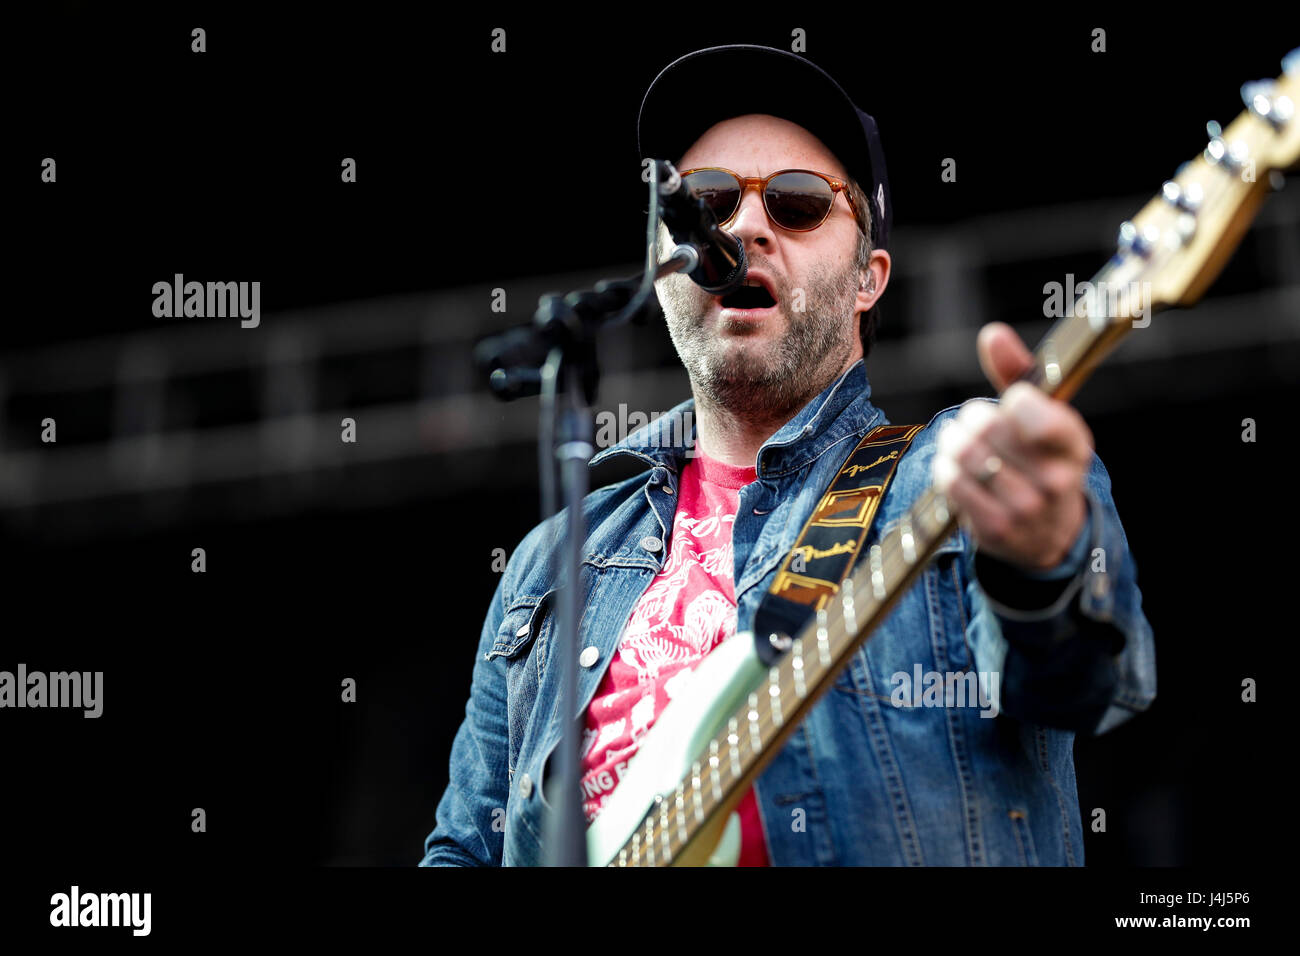 Darryl James, bass player of the Strumbellas performs at the 2017 Beale Street Music Festival at Tom Lee Park in Memphis, Tenn. on May 5, 2017. Stock Photo